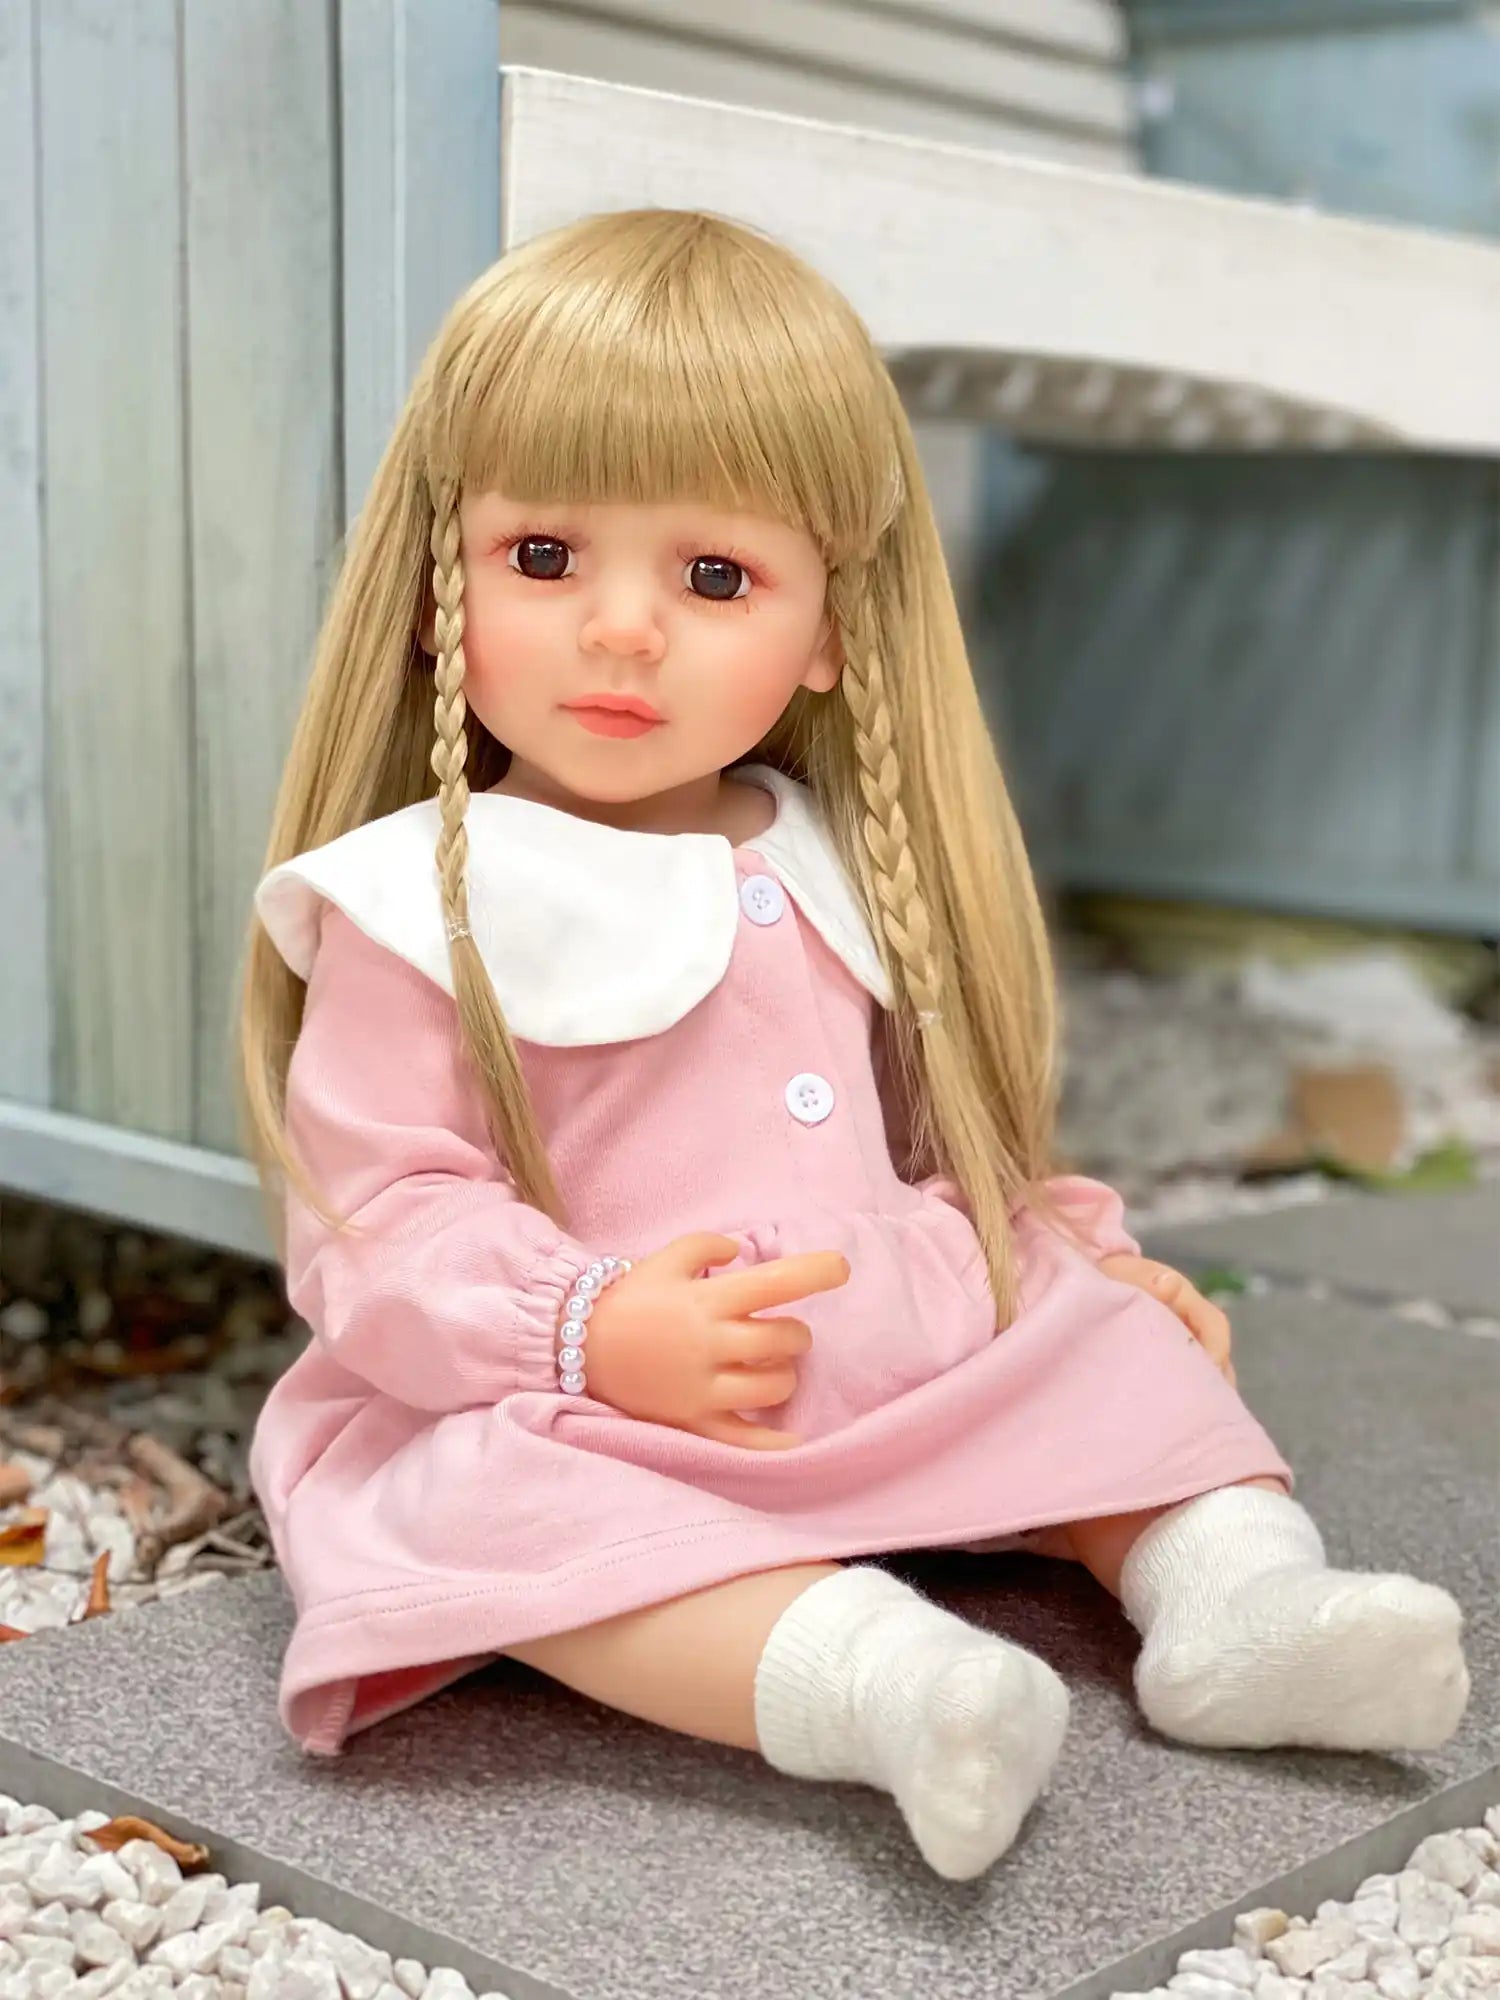 Lifelike doll with pigtails, wearing a rose-pink dress, sitting outdoors on a grey mat.